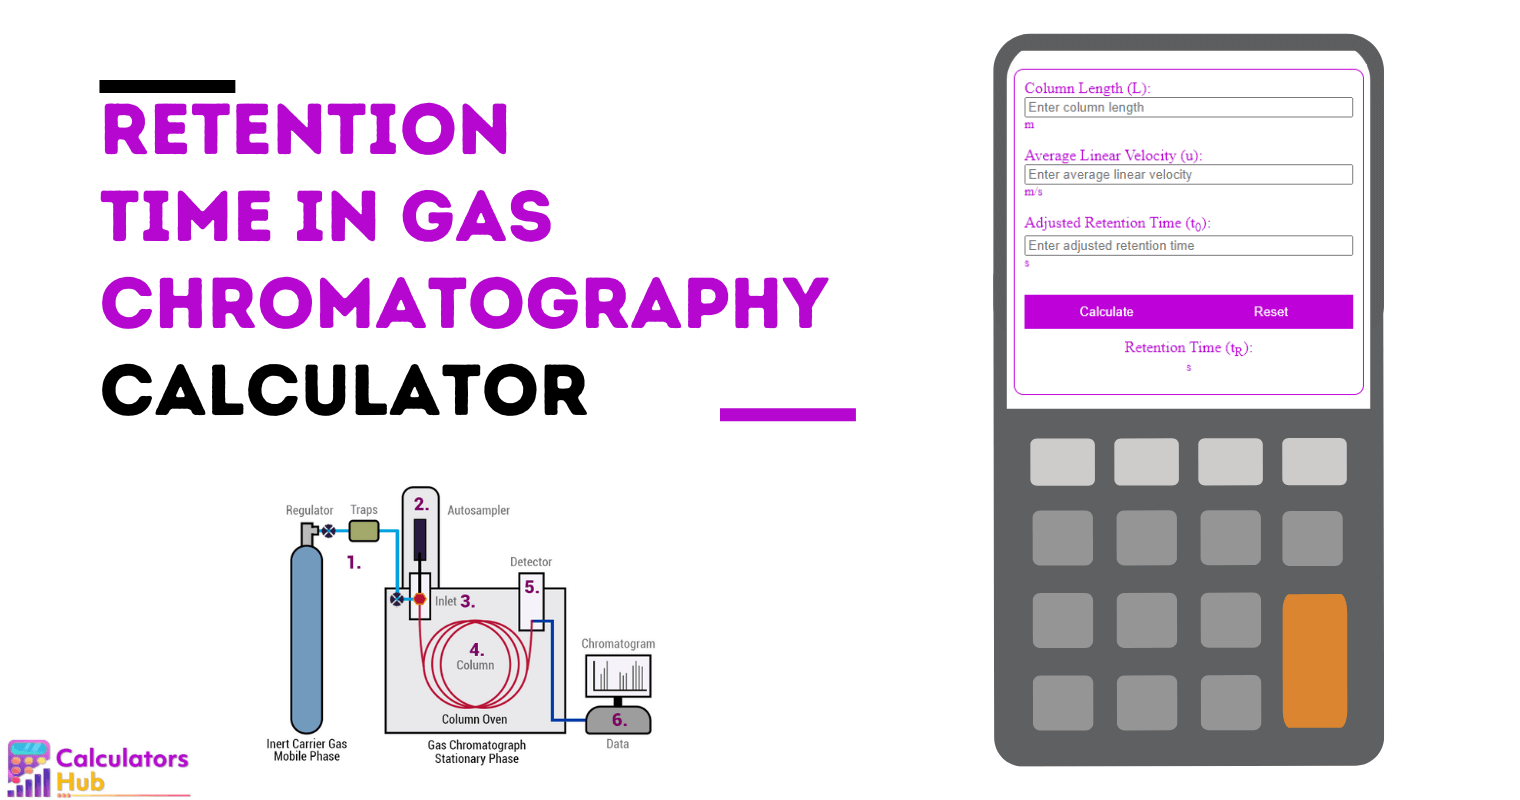 Retention Time in Gas Chromatography Calculator